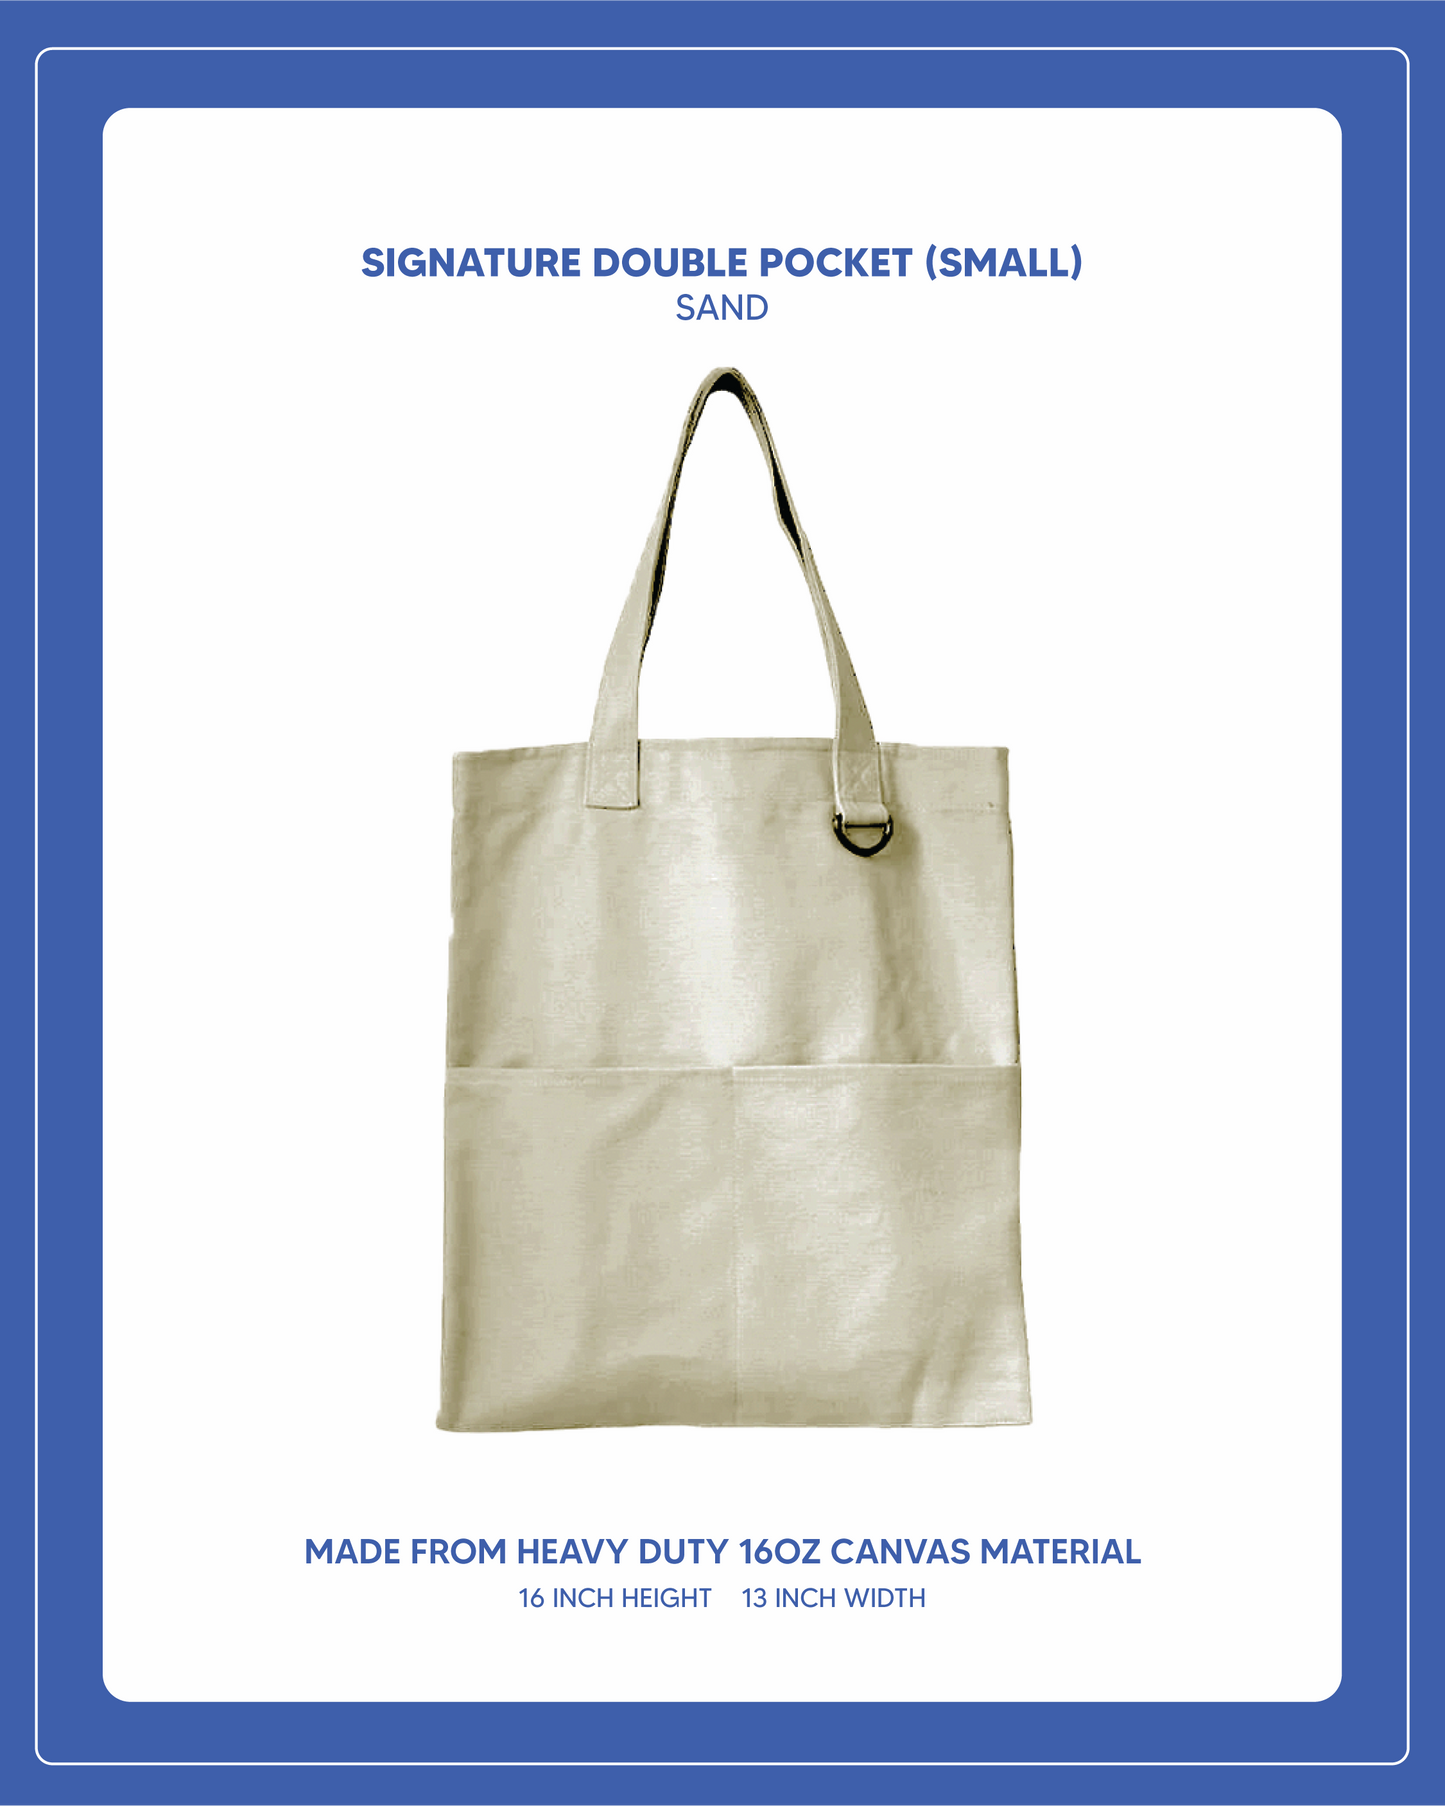 Double Pocket Signature Tote (Small) - Sand